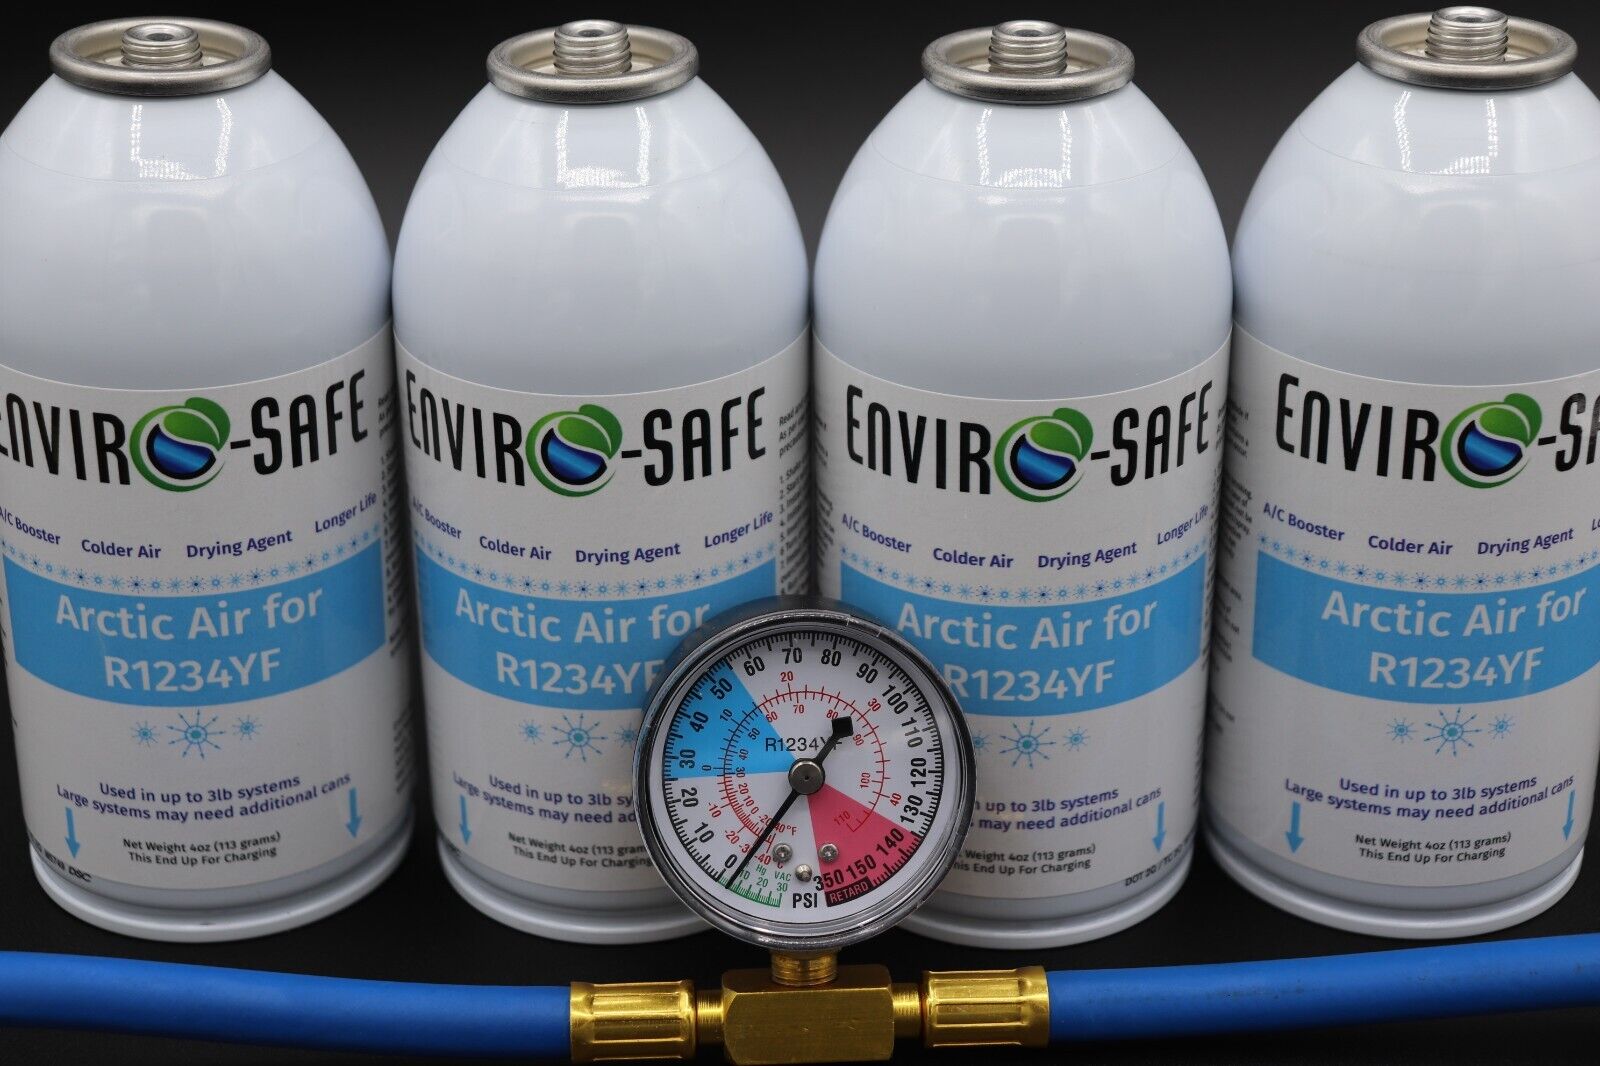 Arctic Air for R1234yf, 4 cans with Gauge, COLDER AIR, Enviro-Safe